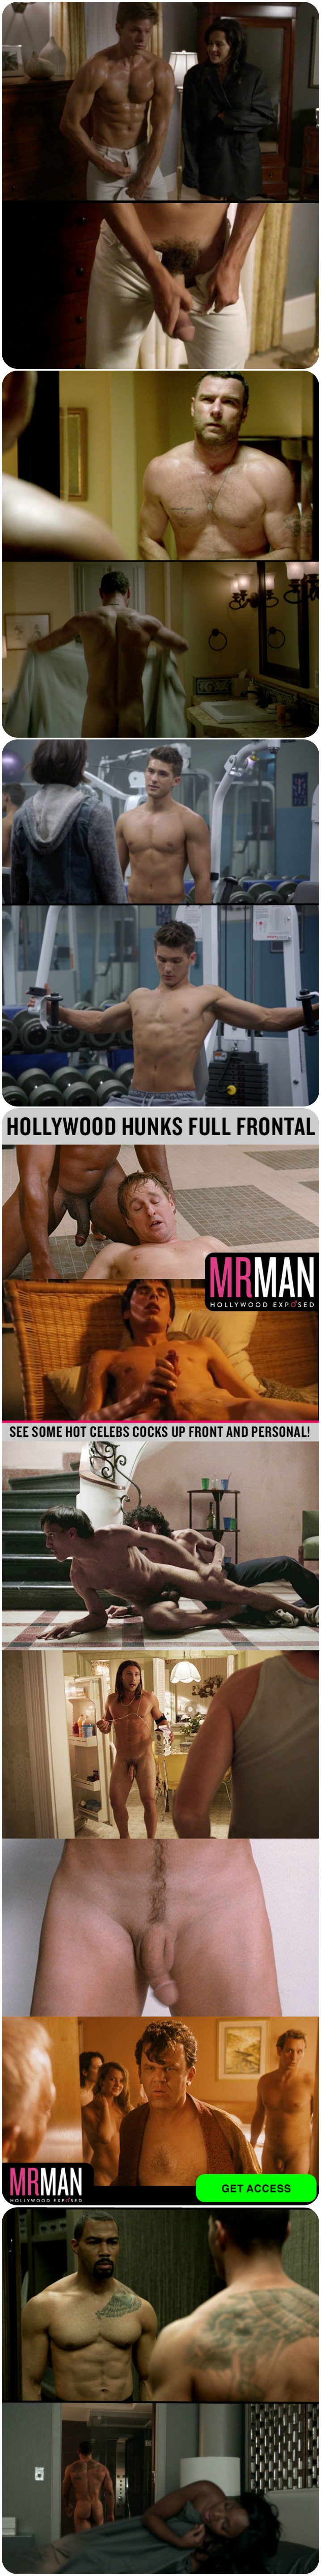 Hollywood Actors Naked